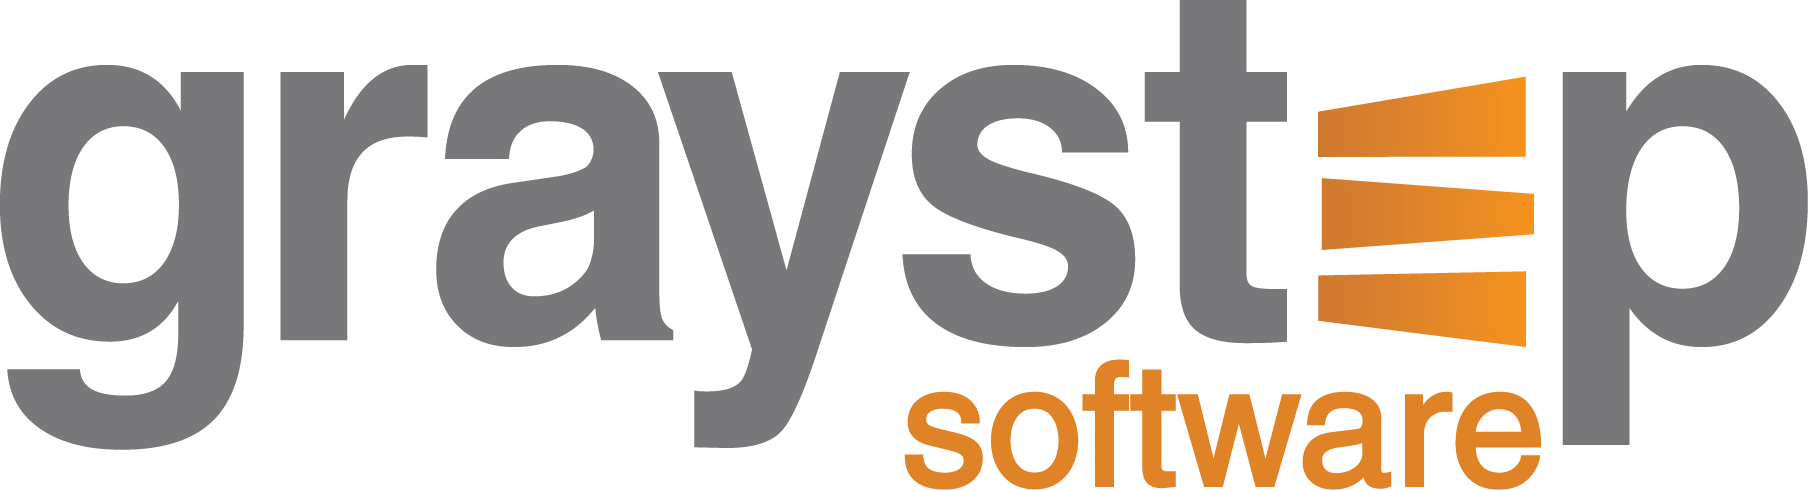 Gray Step Software :: Support Ticket System